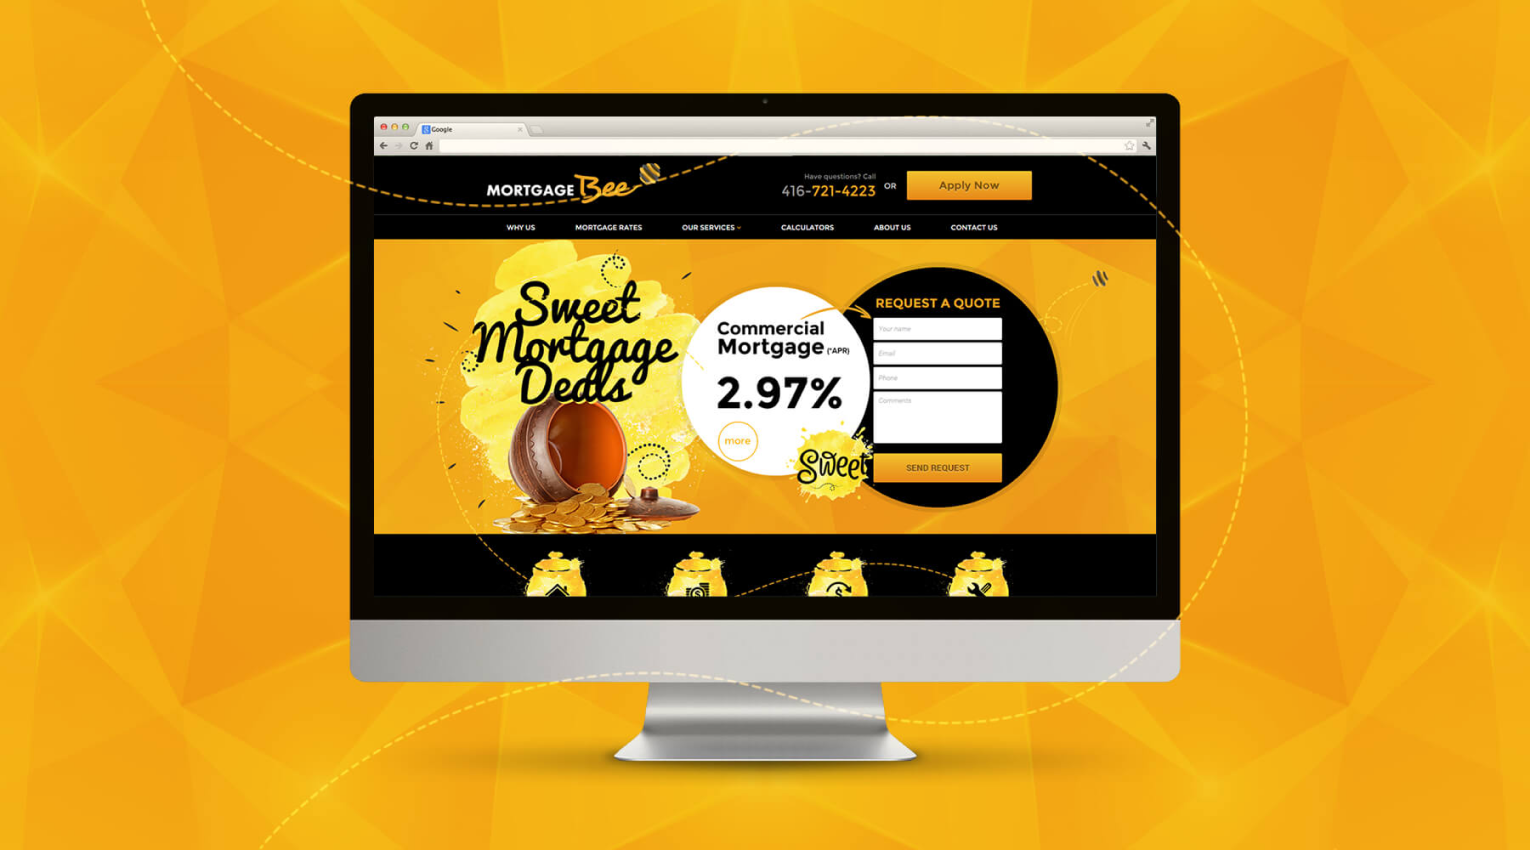 Mortgage bee banner